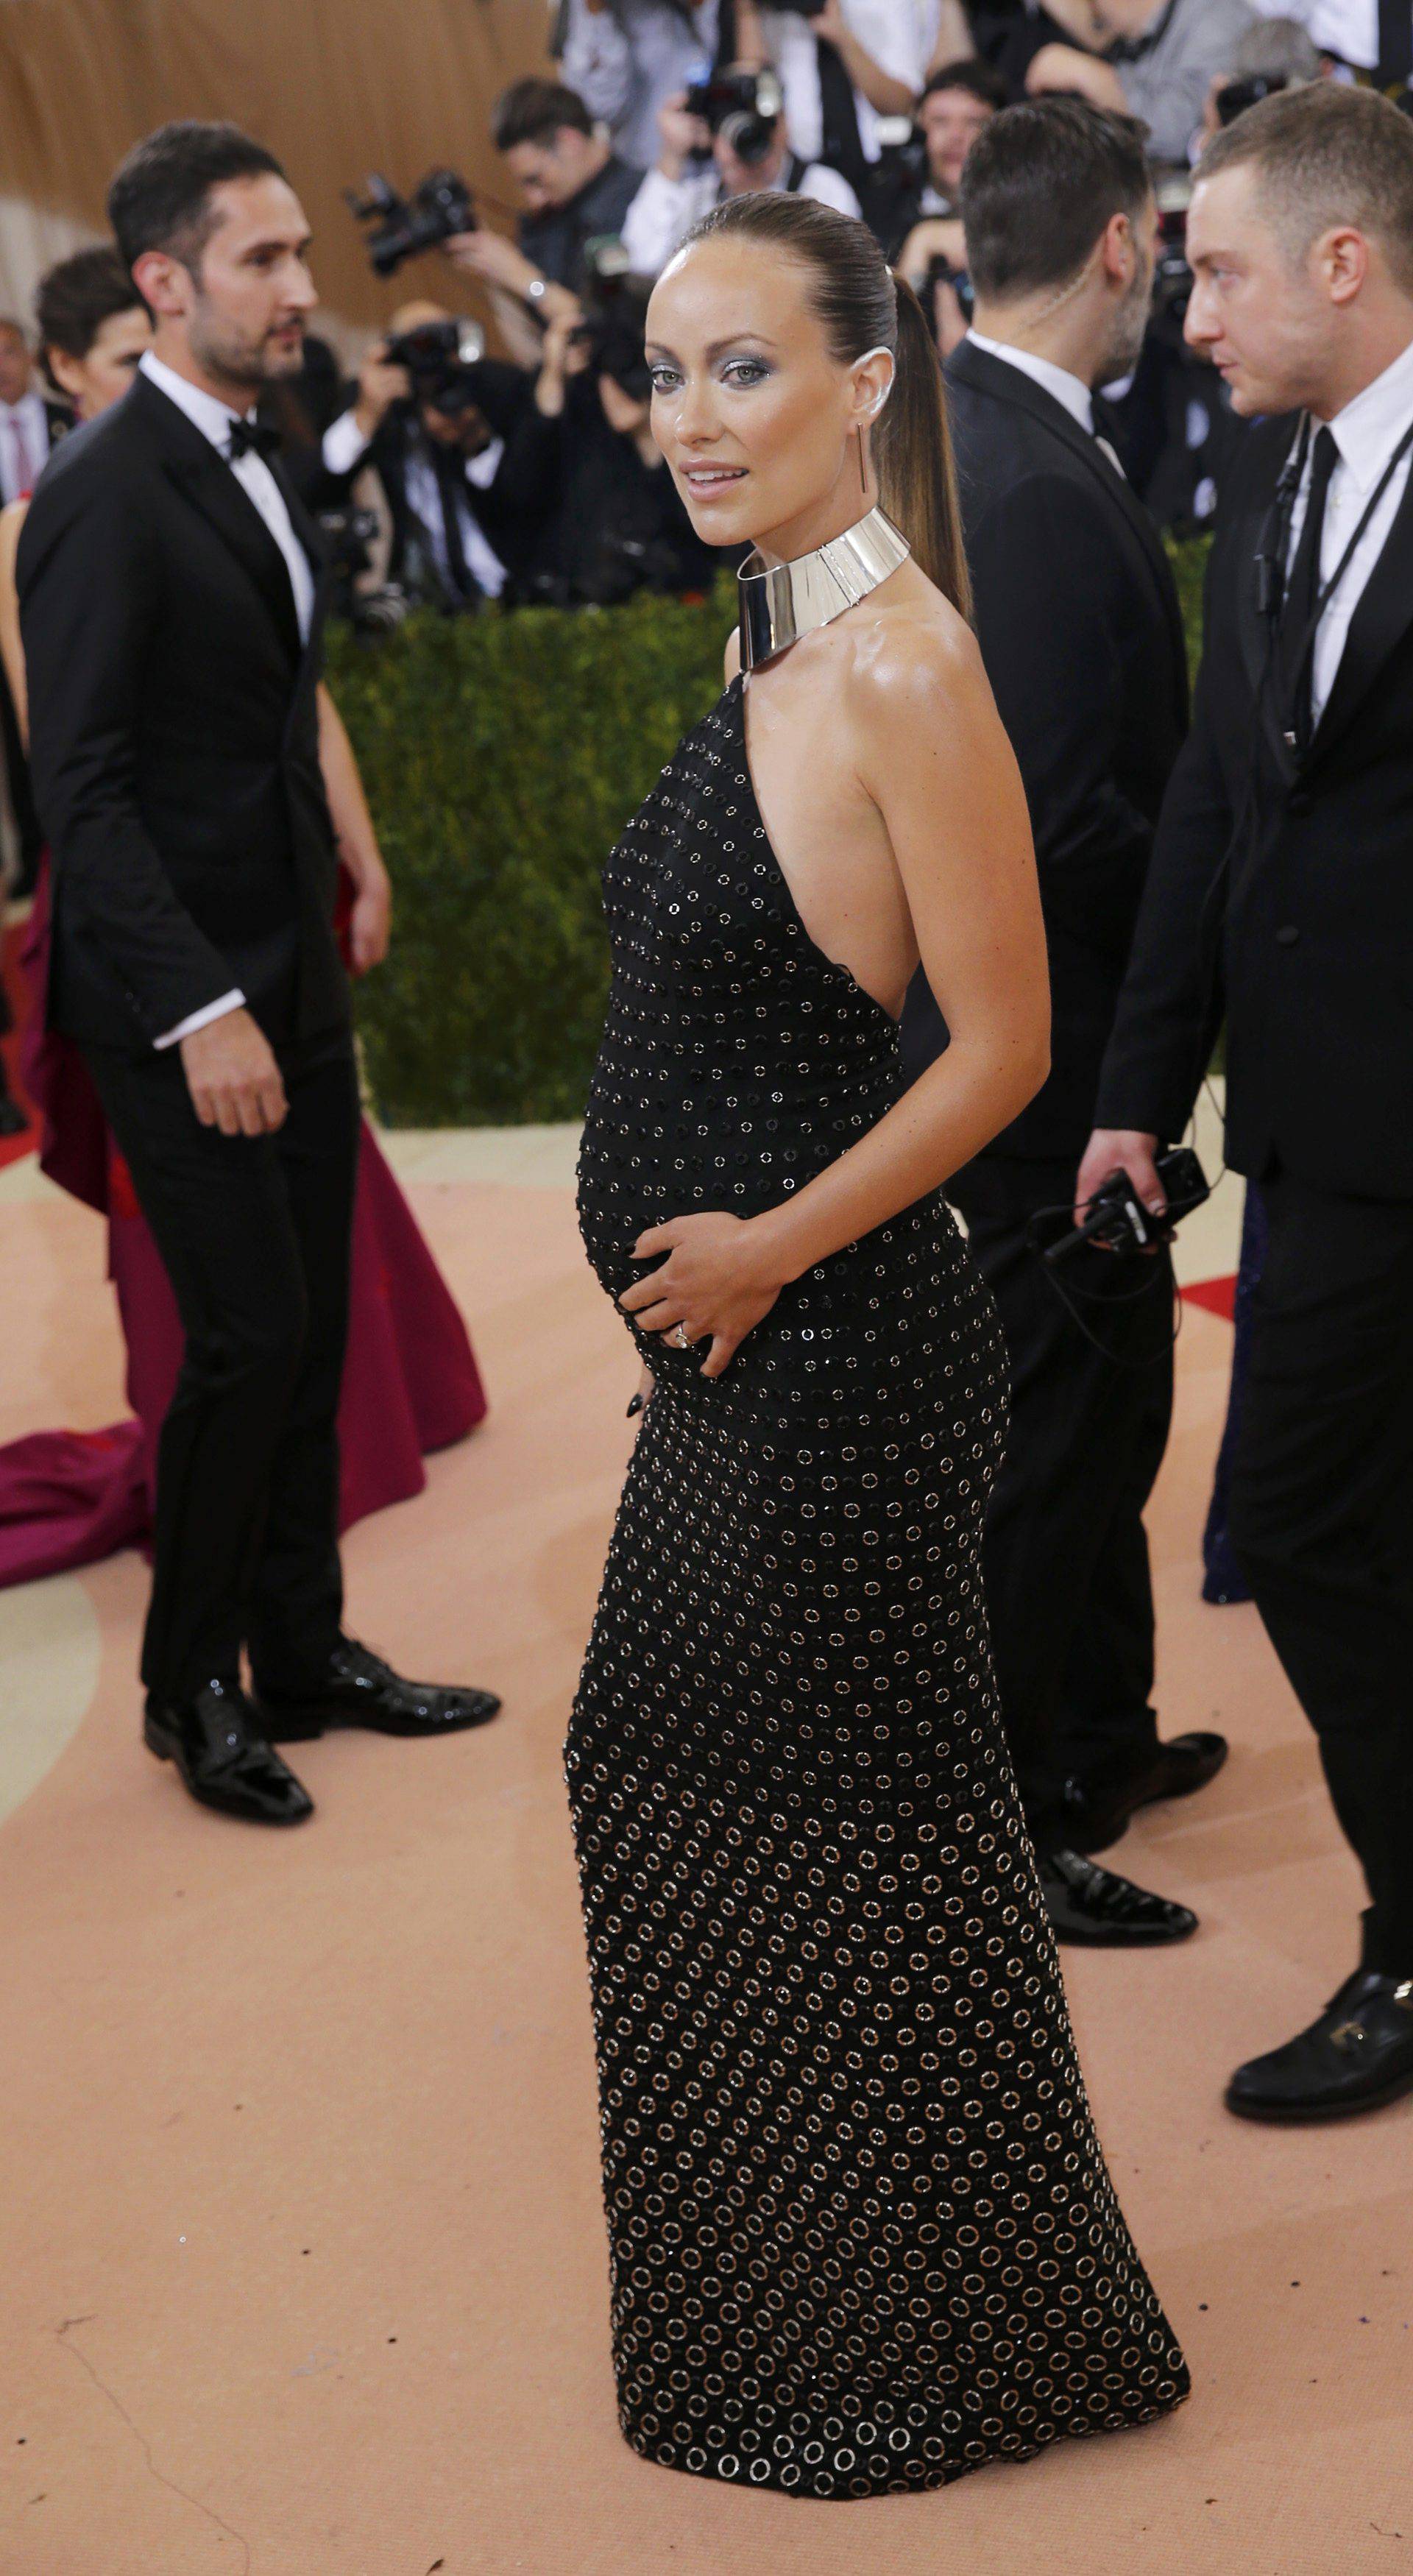 Actress Olivia Wilde arrives at the Met Gala in New York